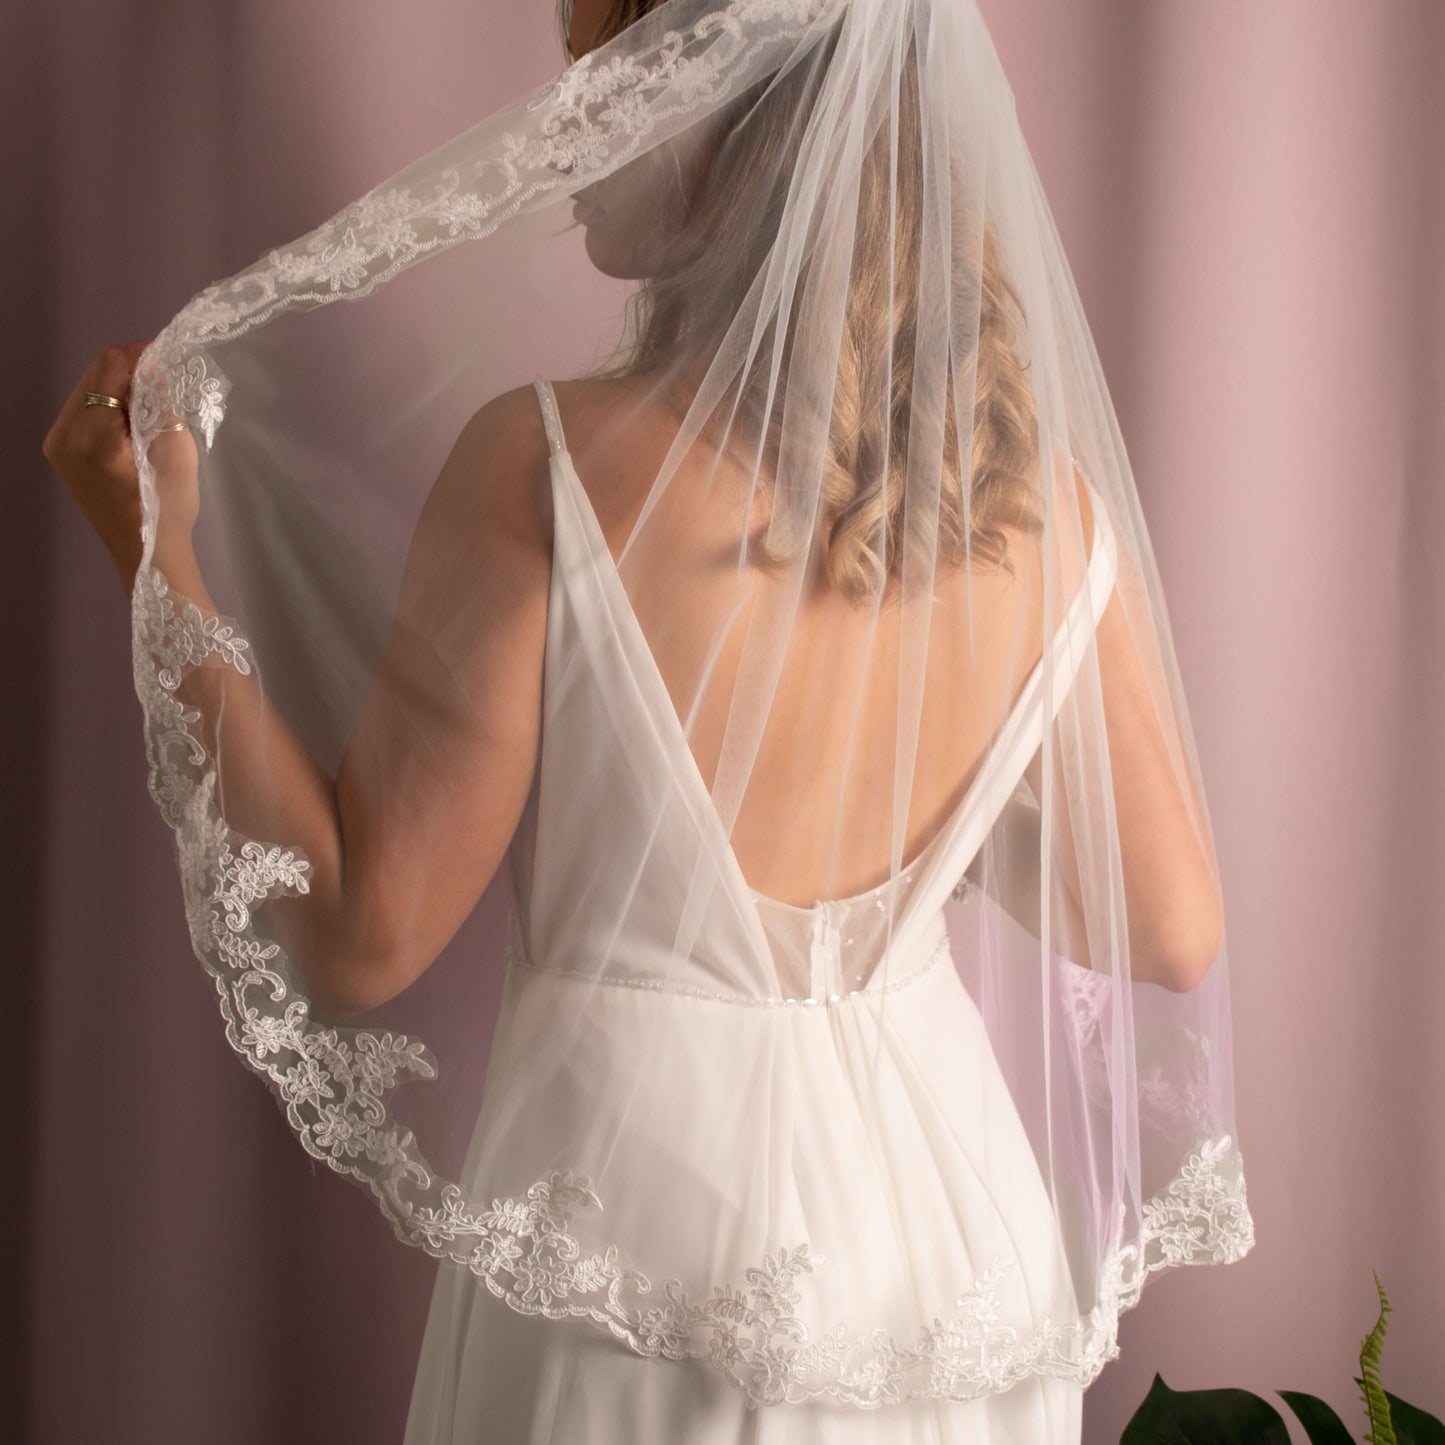 Elegant Layla Corded Lace Veil featuring soft tulle and delicate corded lace detailing, creating a sophisticated bridal look.